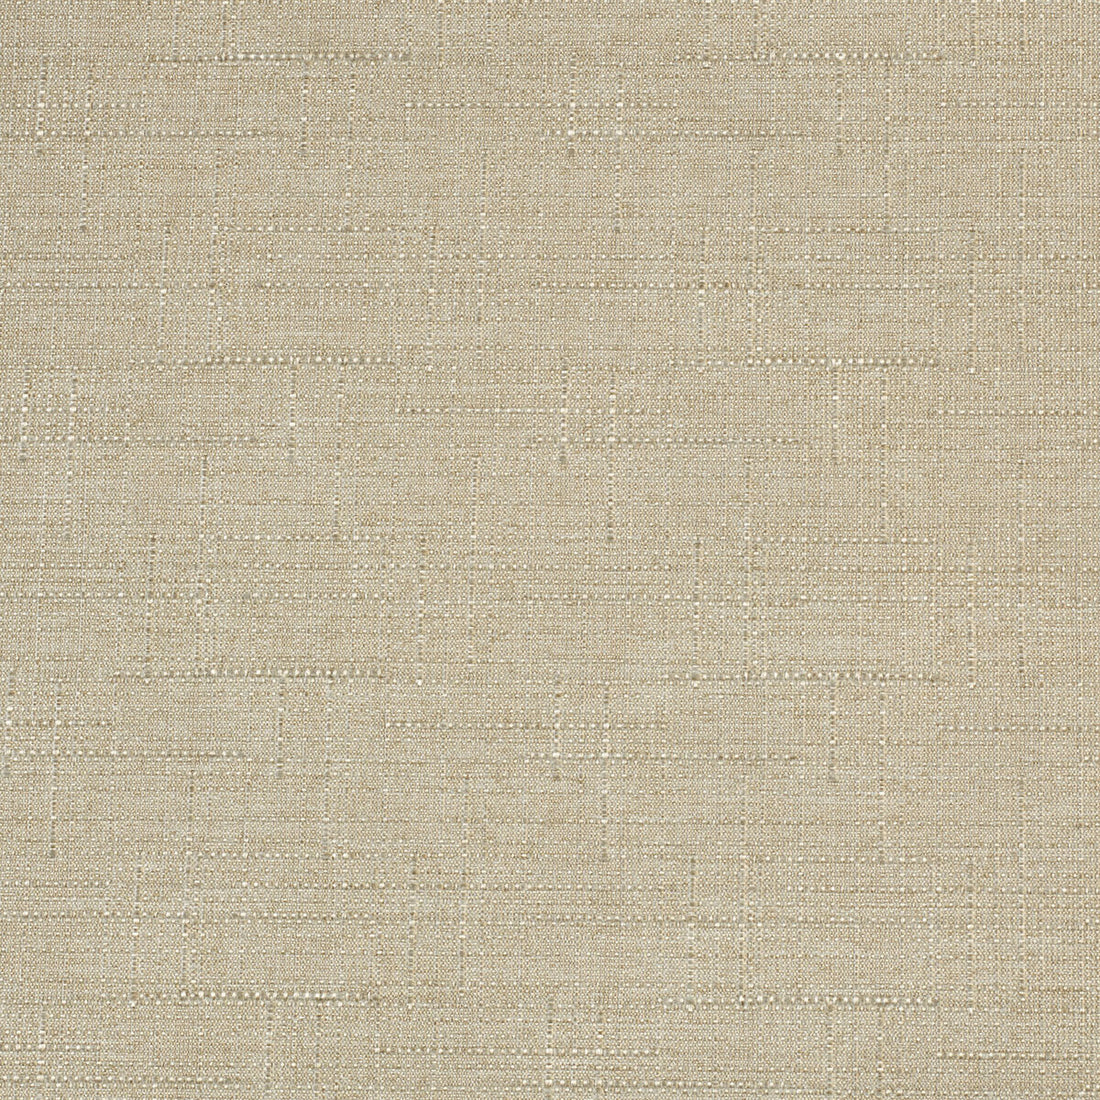 Kravet Contract fabric in 4321-16 color - pattern 4321.16.0 - by Kravet Contract